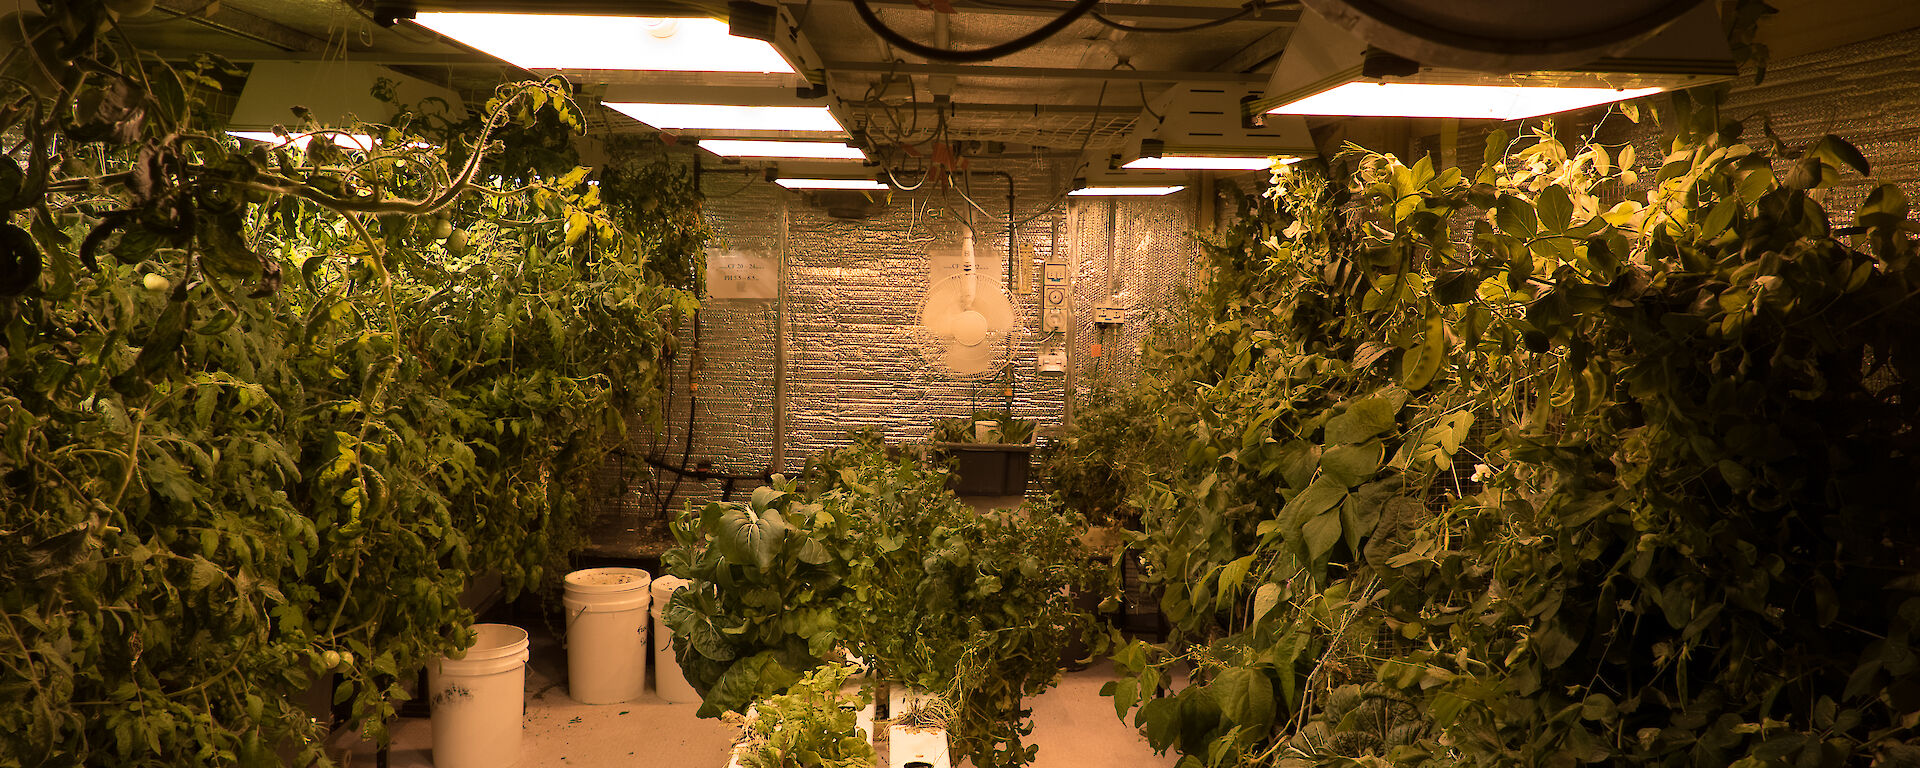 A lot of work is required to clean hydroponics